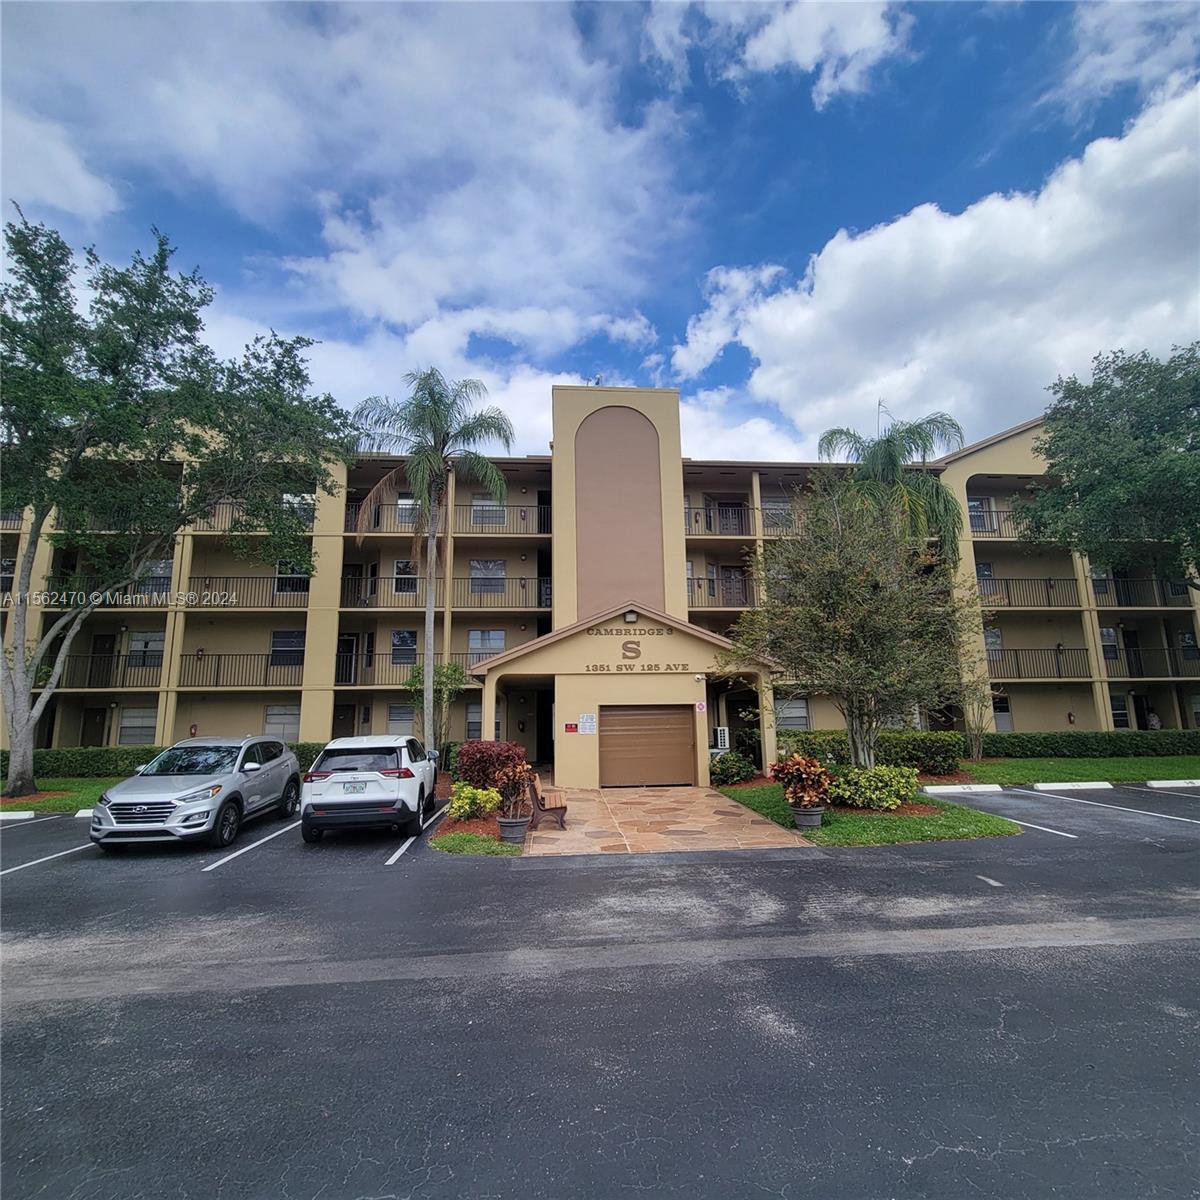 Photo of 1351 SW 125th Ave #410S in Pembroke Pines, FL